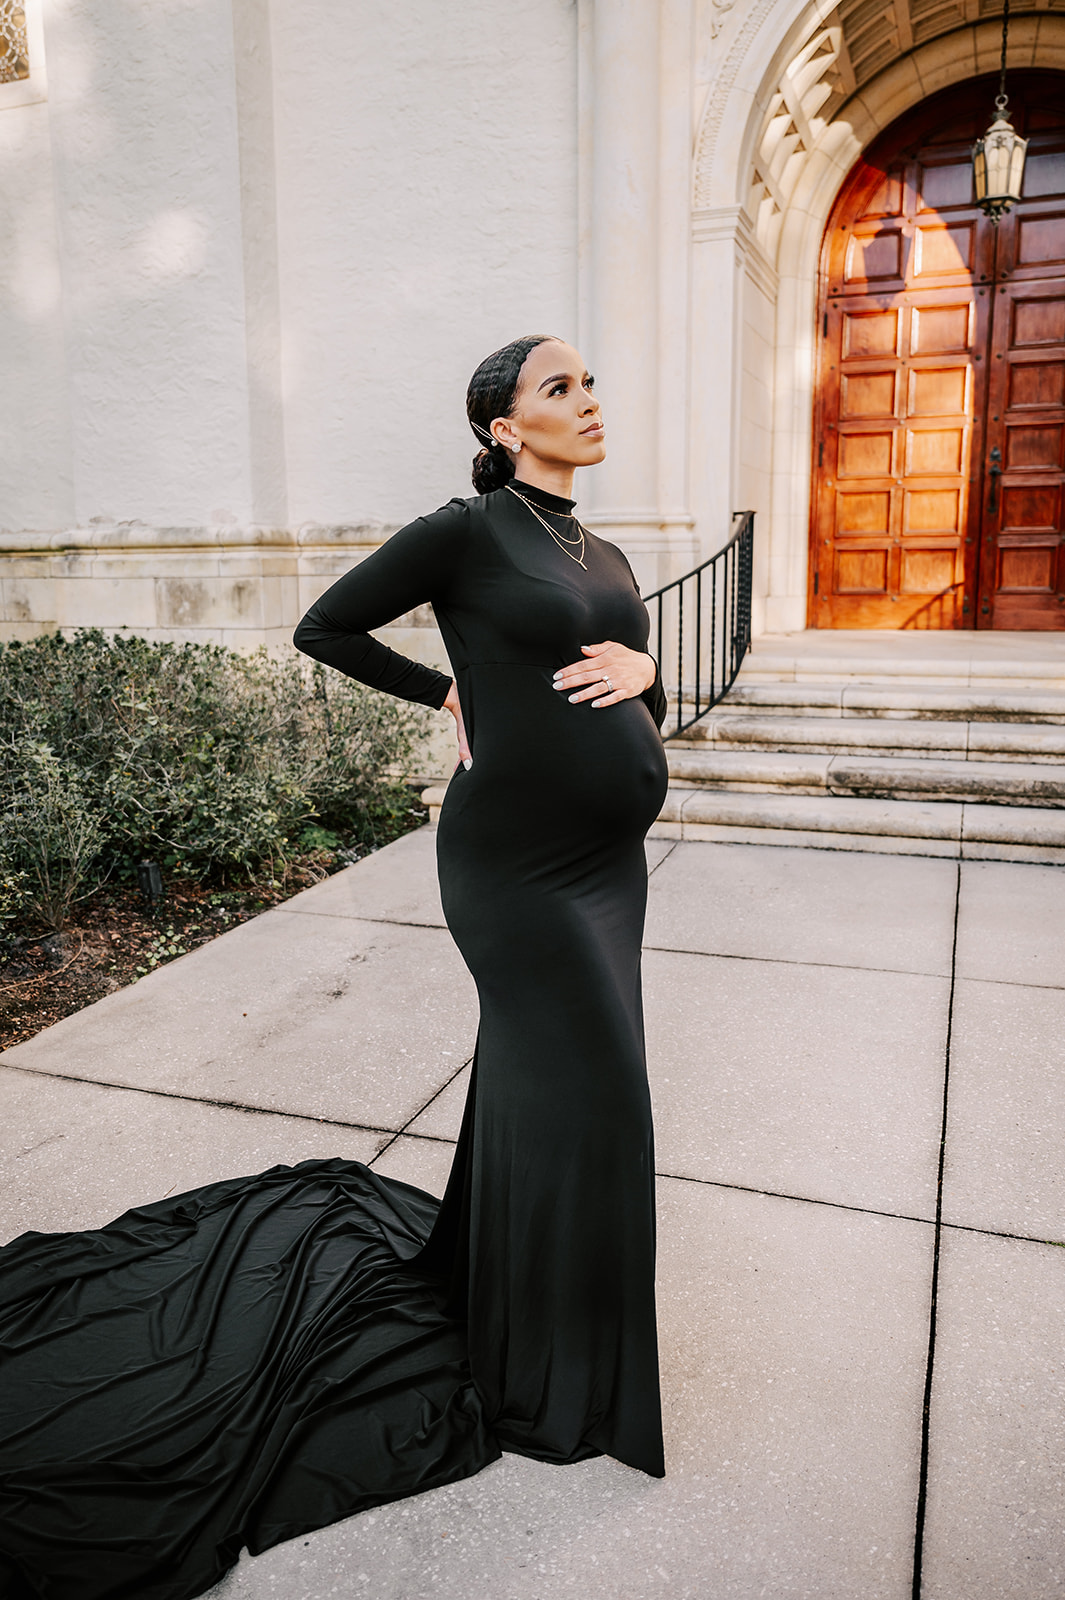 A mother to be in a long black maternity gown stands by a historical building with a hand on her bump